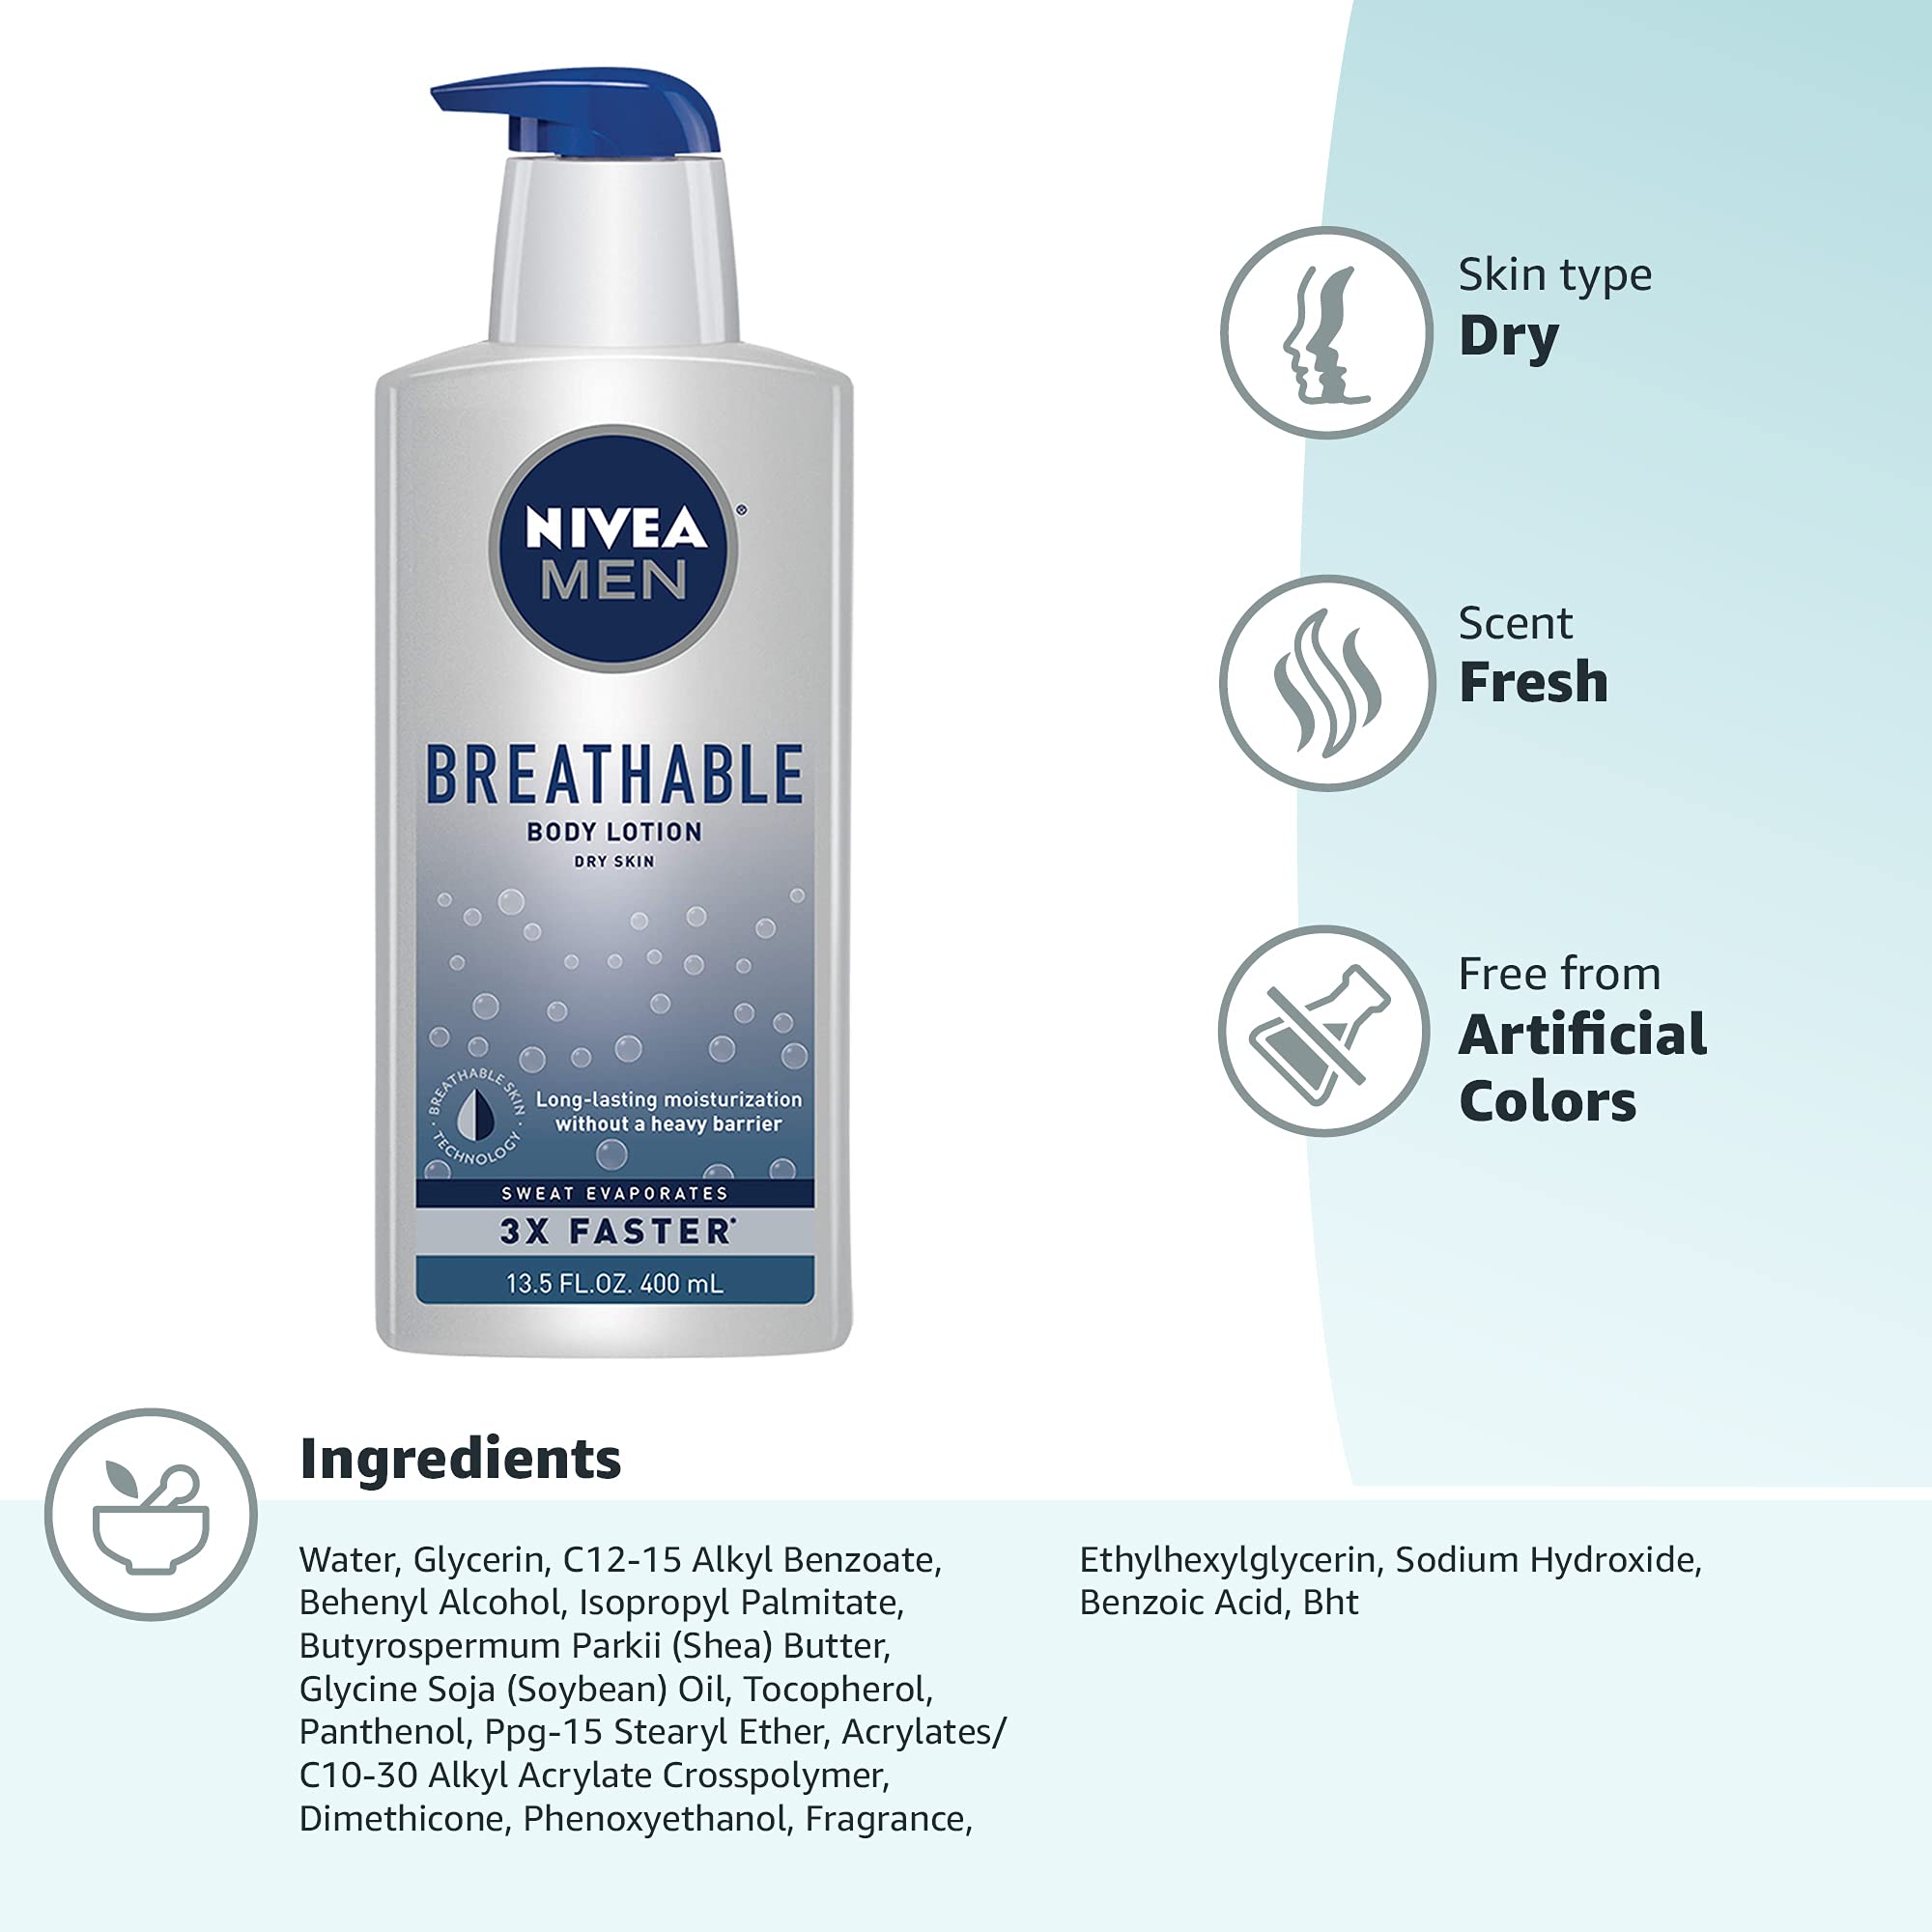 Nivea Men Breathable Body Lotion - Sweat Evaporates Faster, No Sticky Feel, Fresh Scent, Dry Skin, 13.5 Ounce